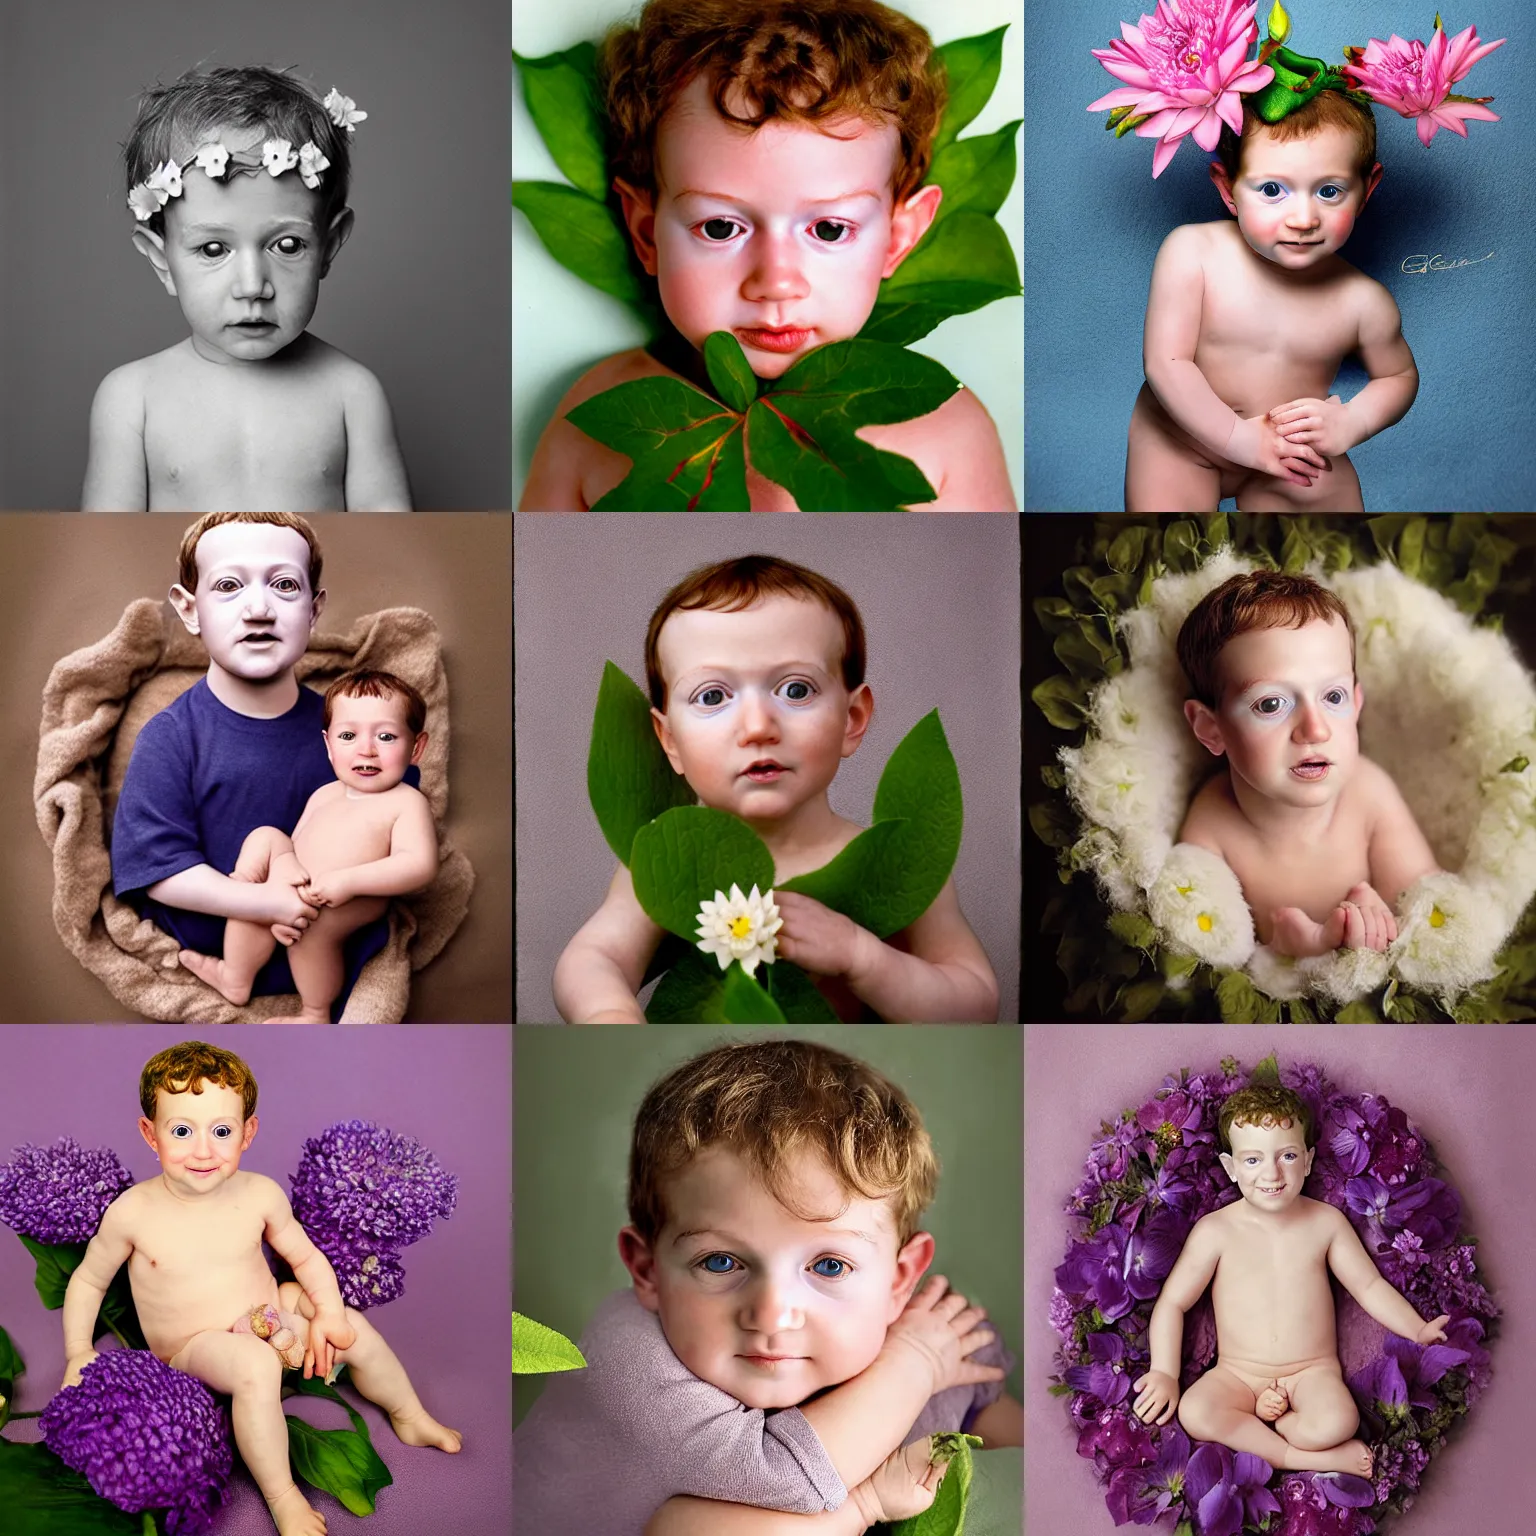 Prompt: Portrait photo of a baby Mark Zuckerberg with flower, photographed by Anne Geddes